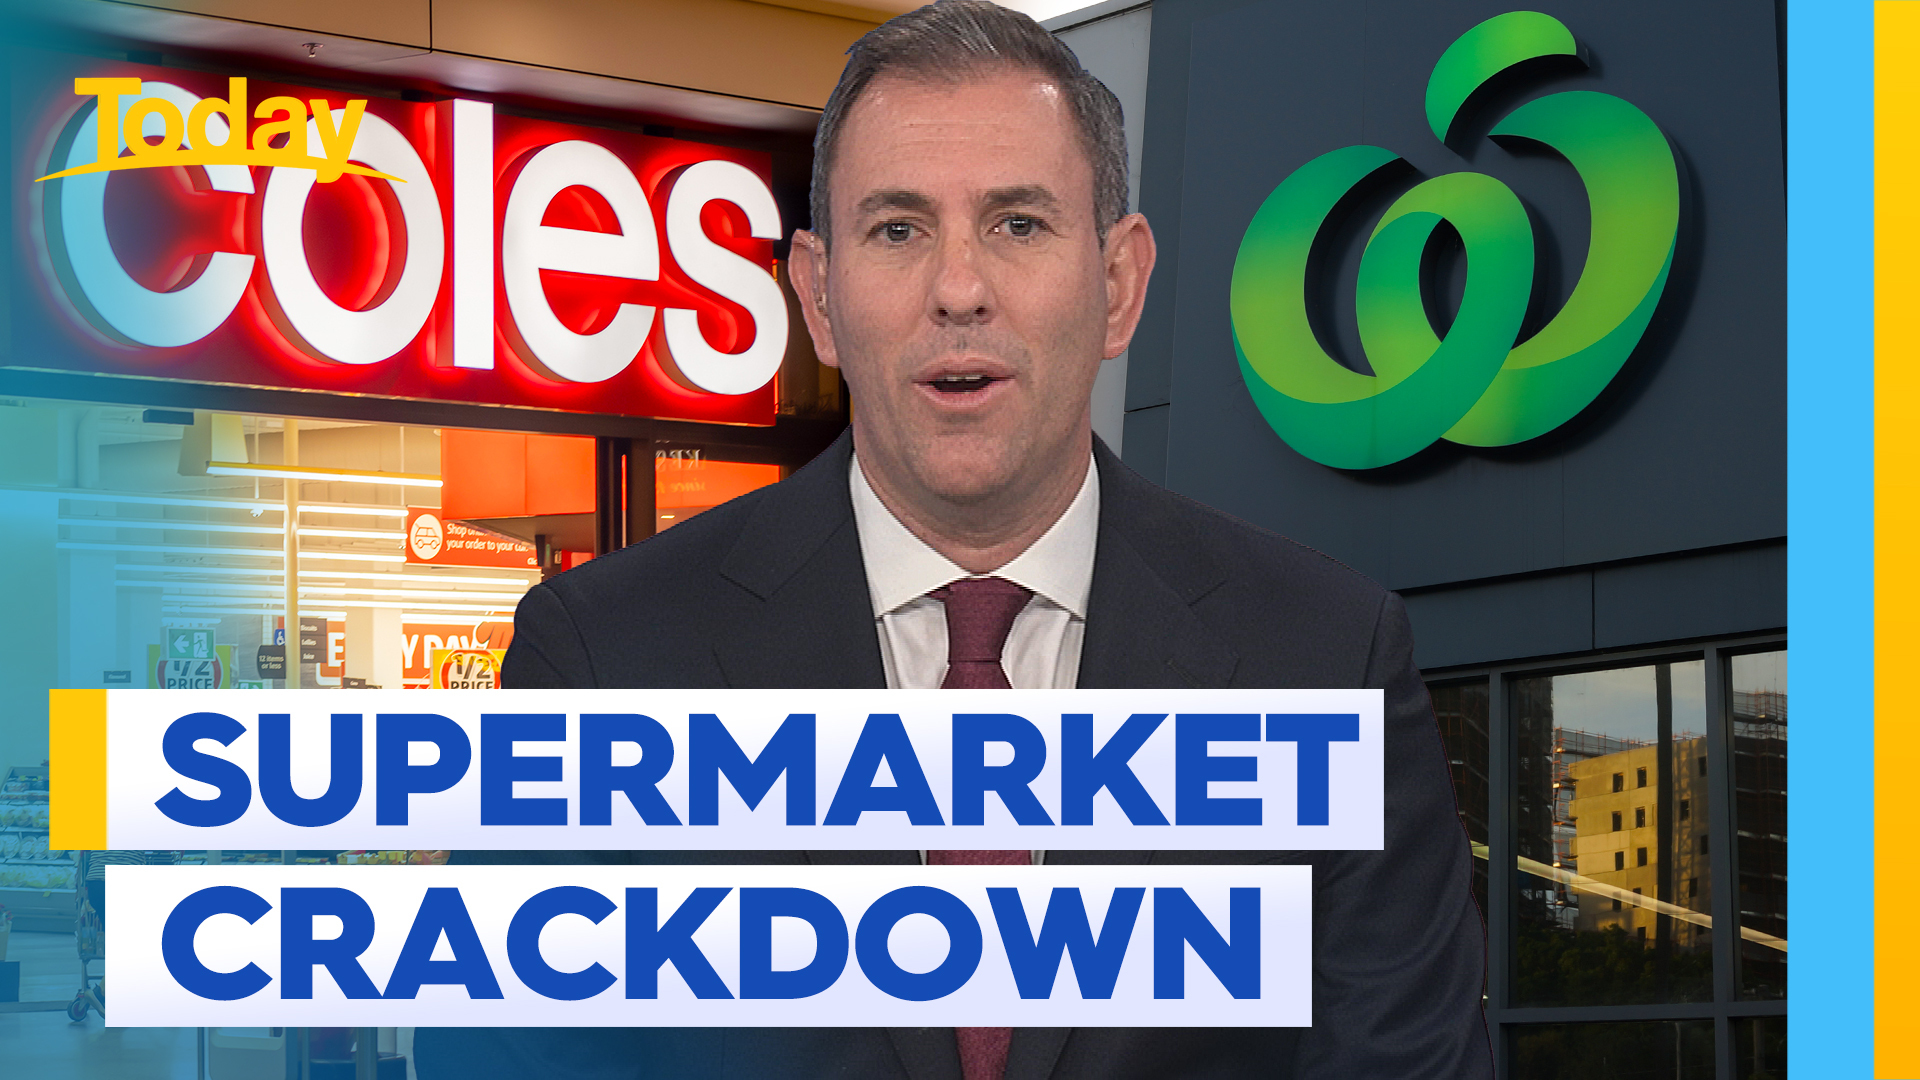 Jim Chalmers cracking down on supermarket giants